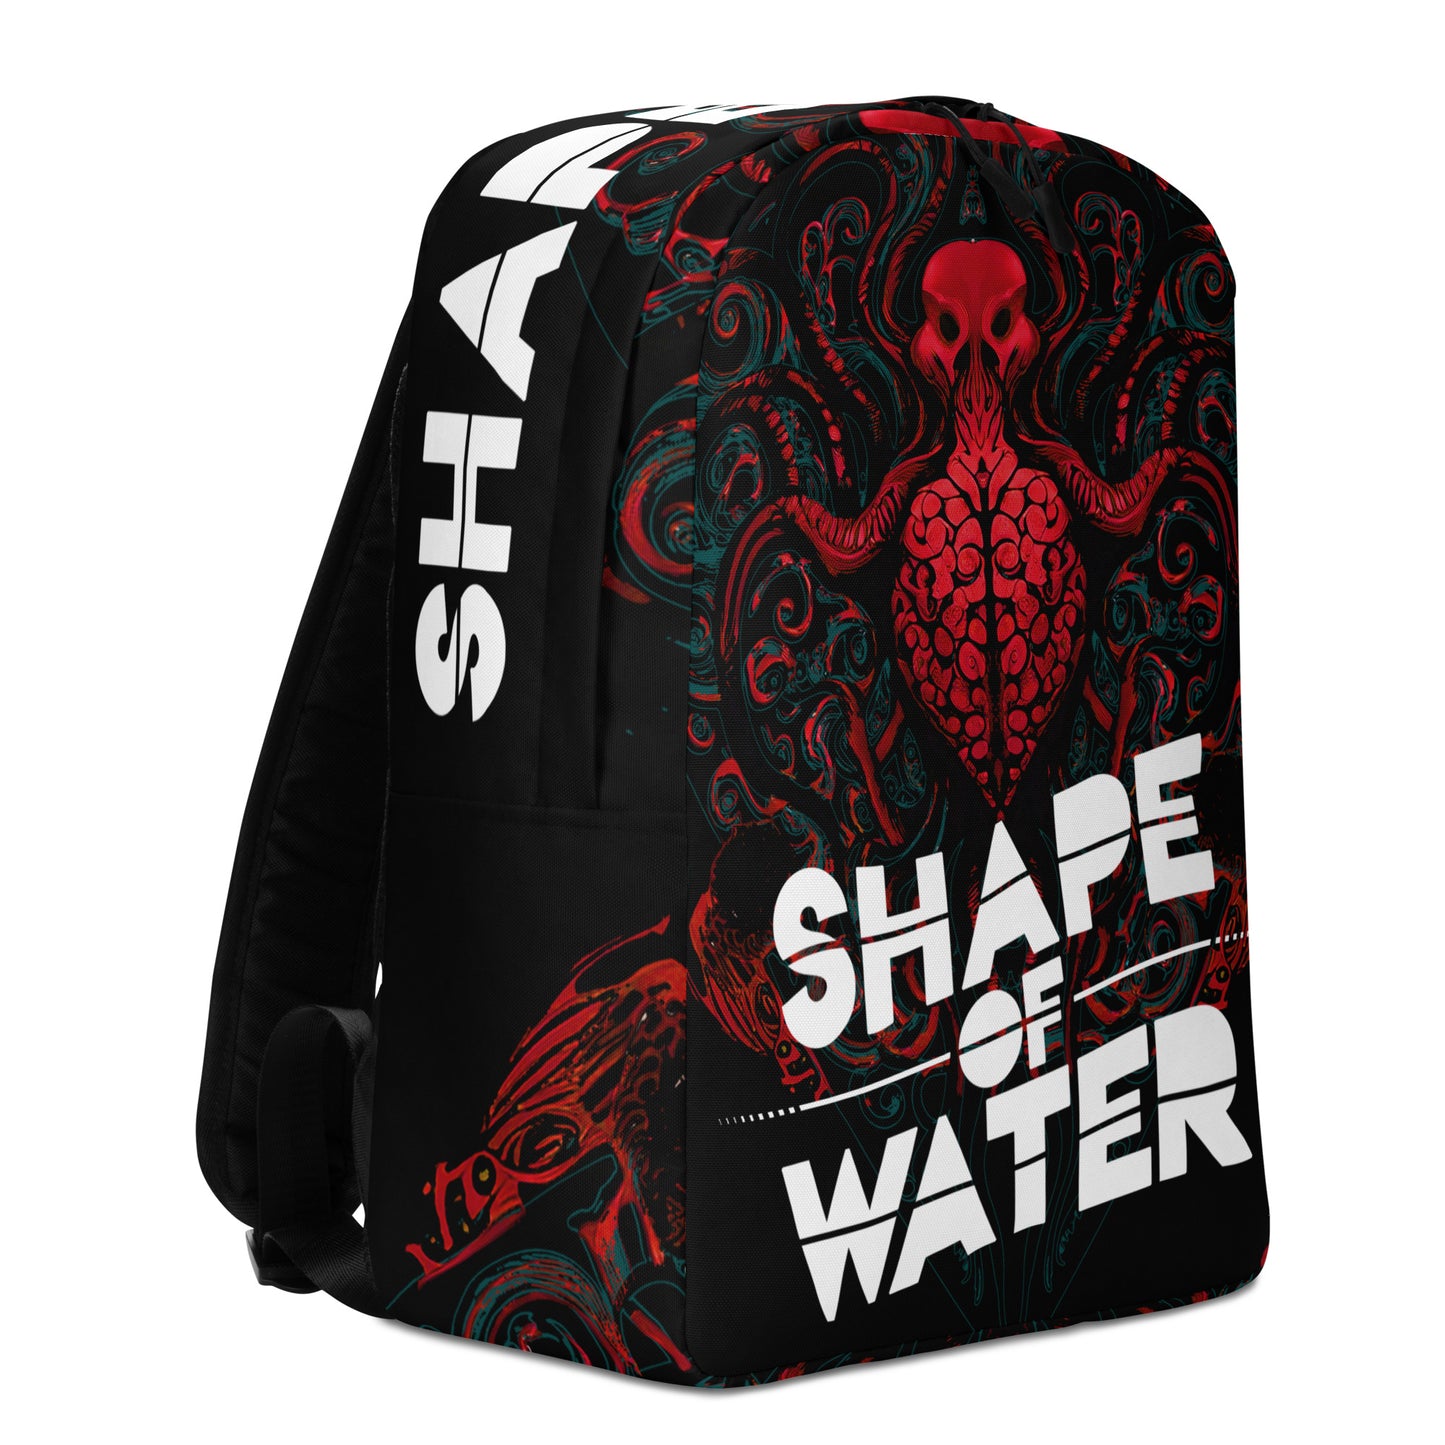 Shape Of Water - Red Cthulhu Backpack